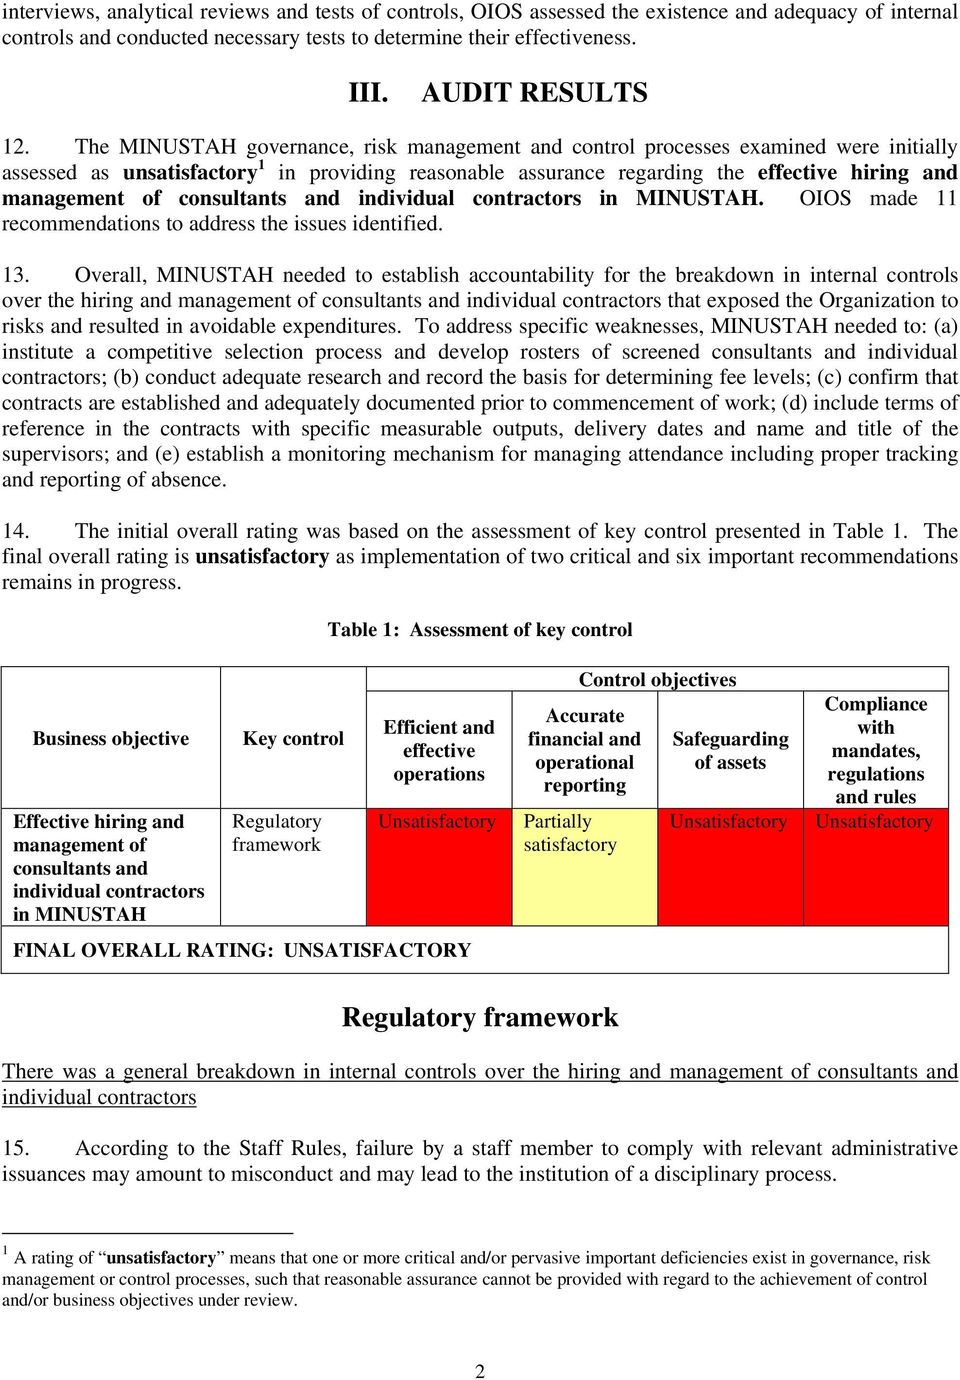 The MINUSTAH governance, risk management and control processes examined were initially assessed as unsatisfactory 1 in providing reasonable assurance regarding the effective hiring and management of